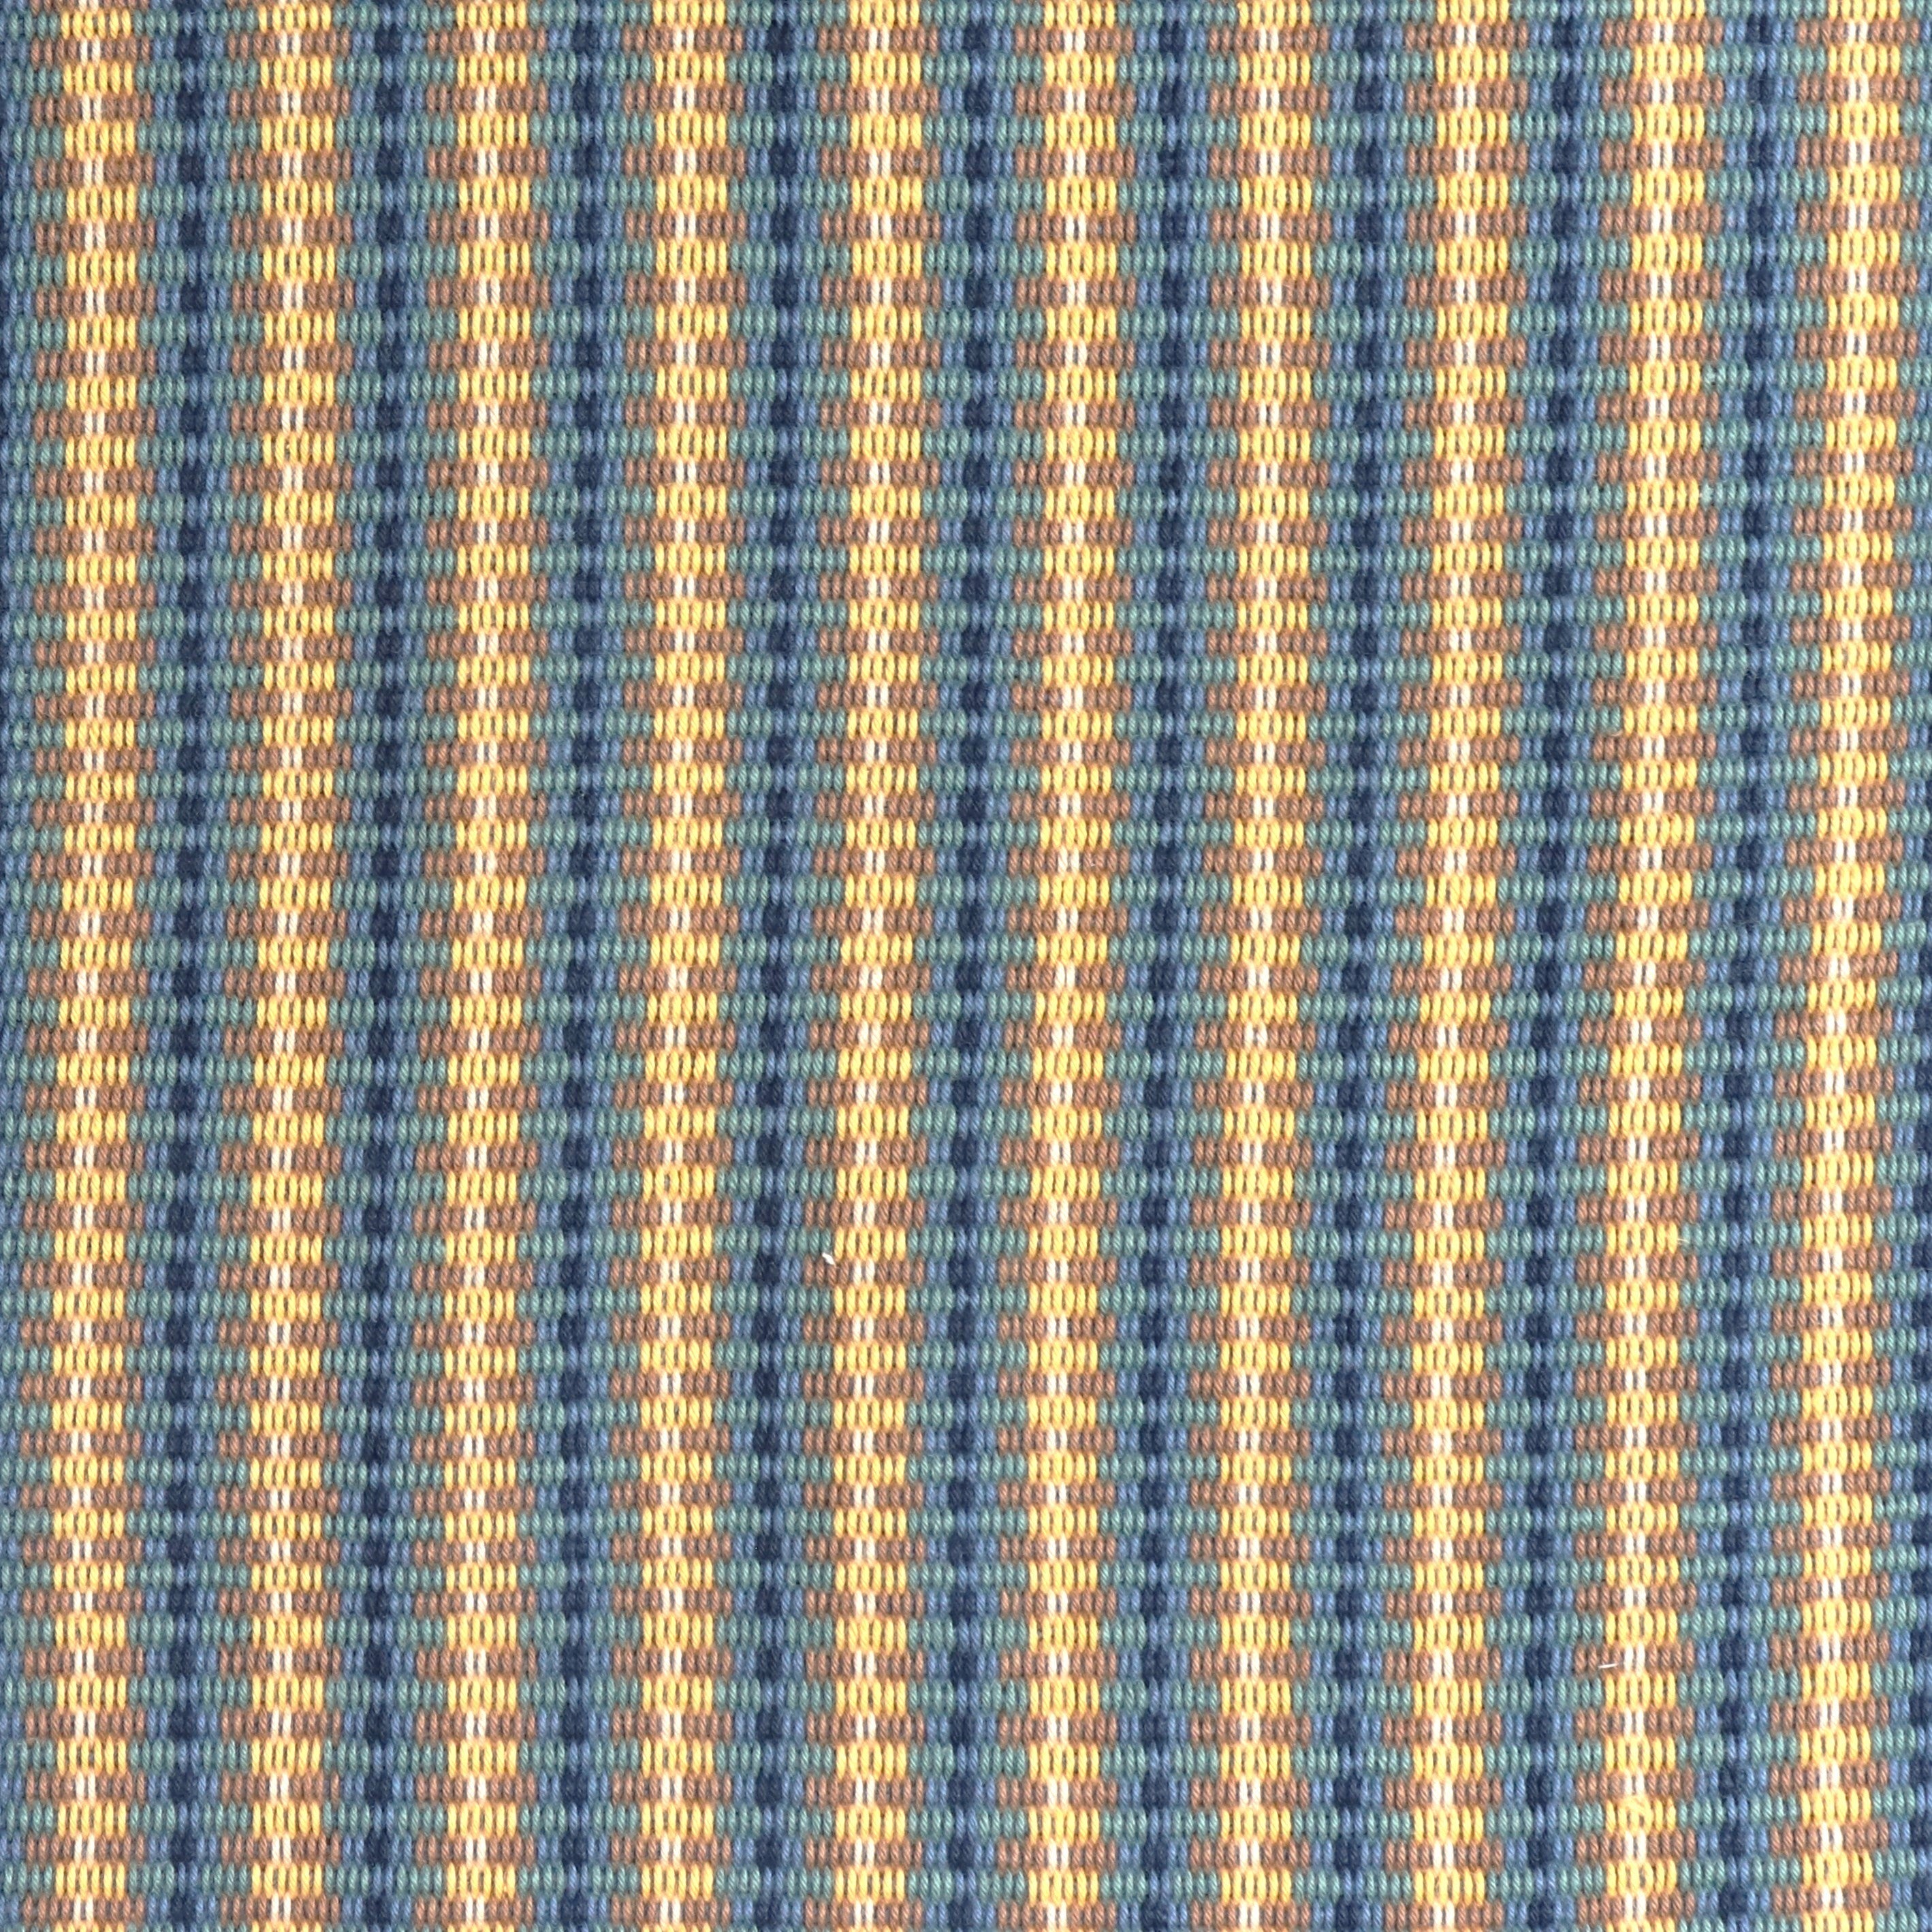 Detail of a hand-woven cotton fabric in an intricate stripe pattern in shades of blue, navy, tan and yellow.